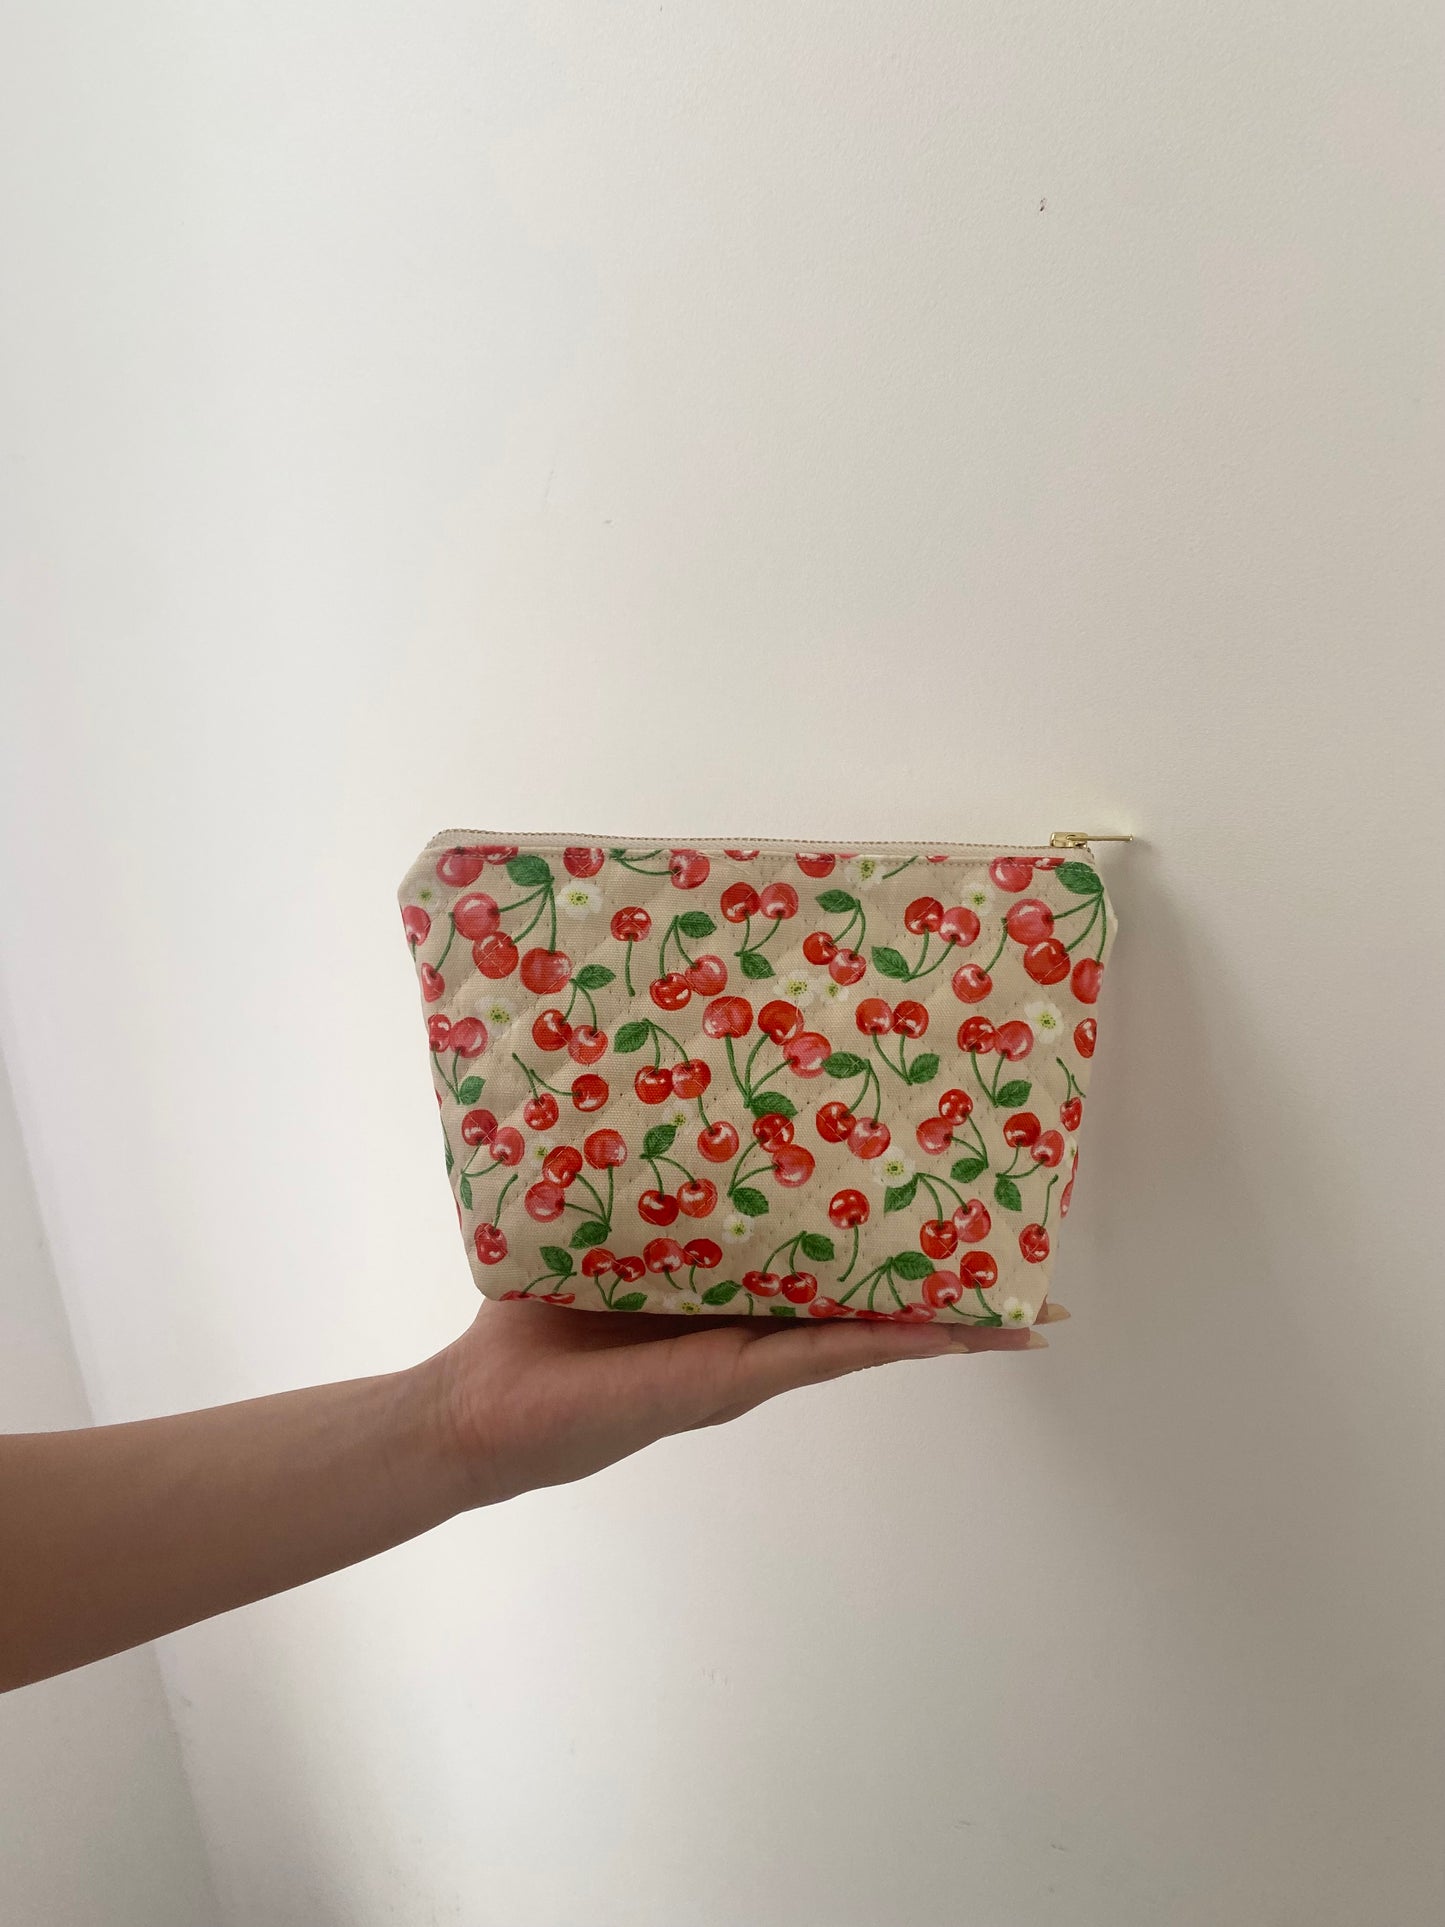 Cherry makeup pouch(small)